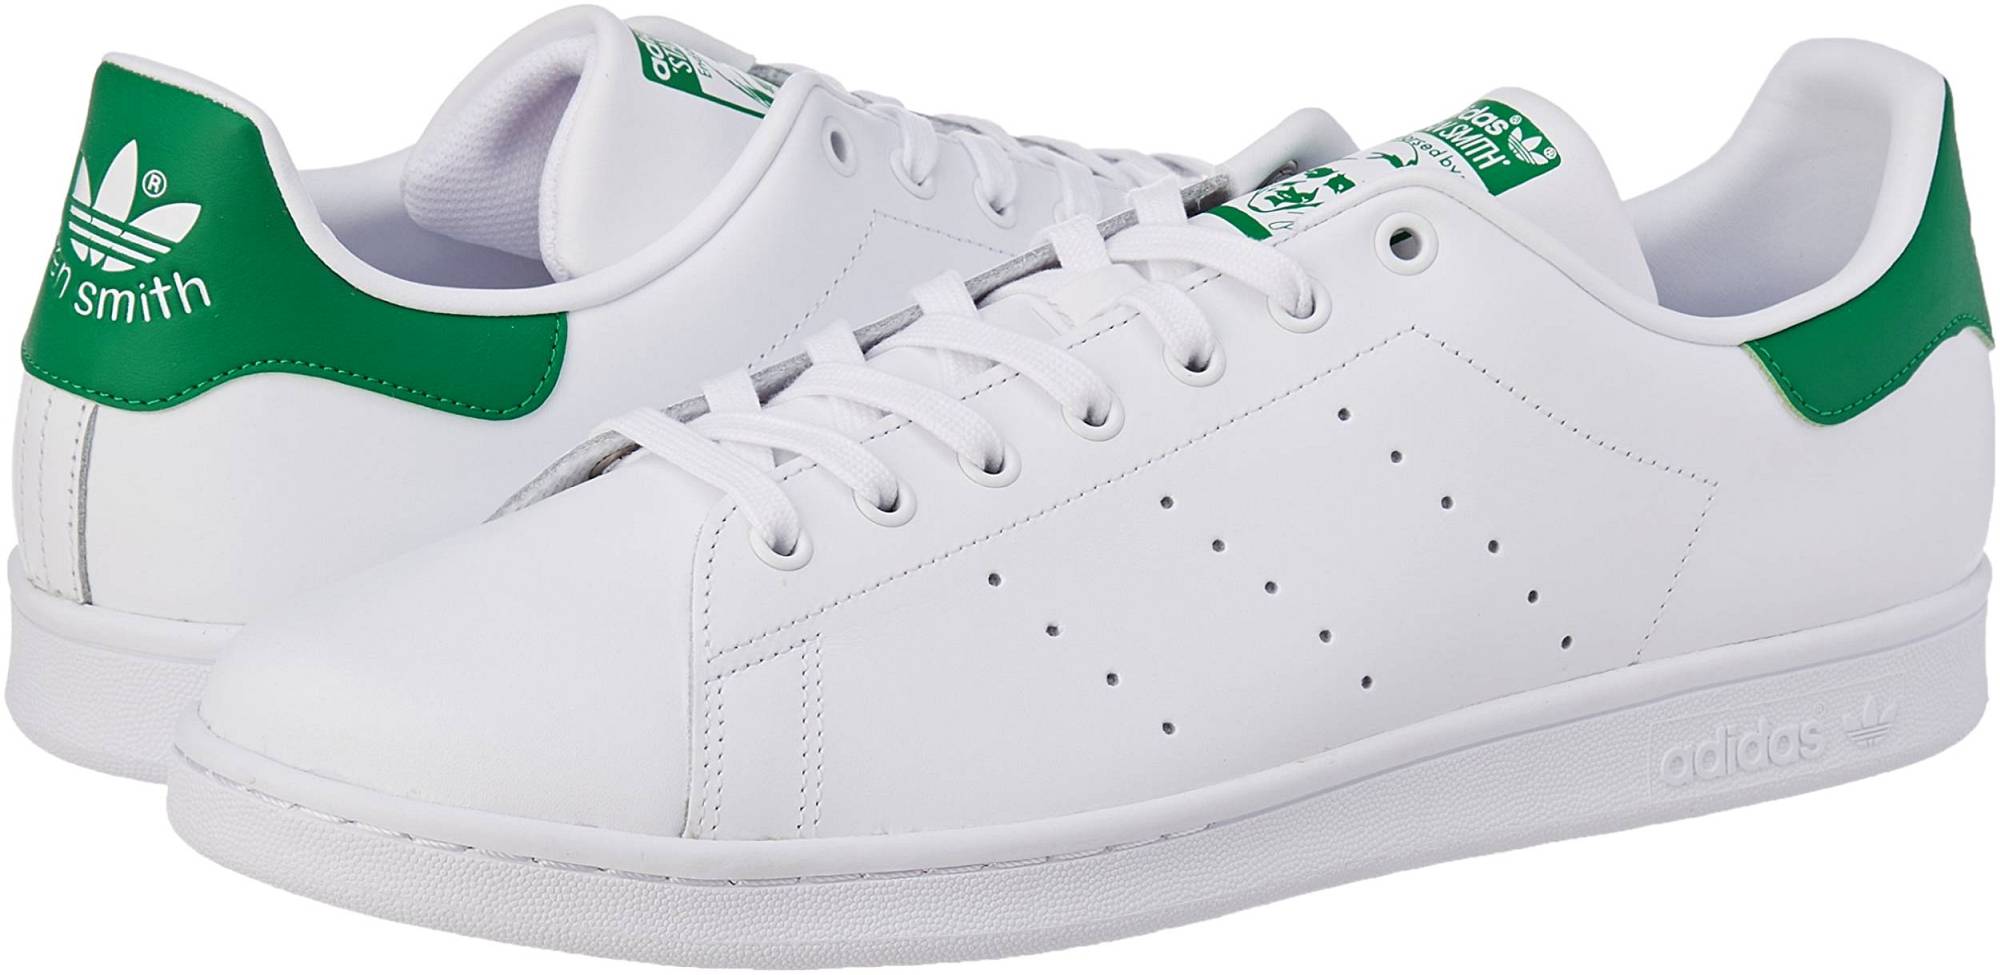 Adidas Stan Smith Shoes Reviews Reasons To Buy